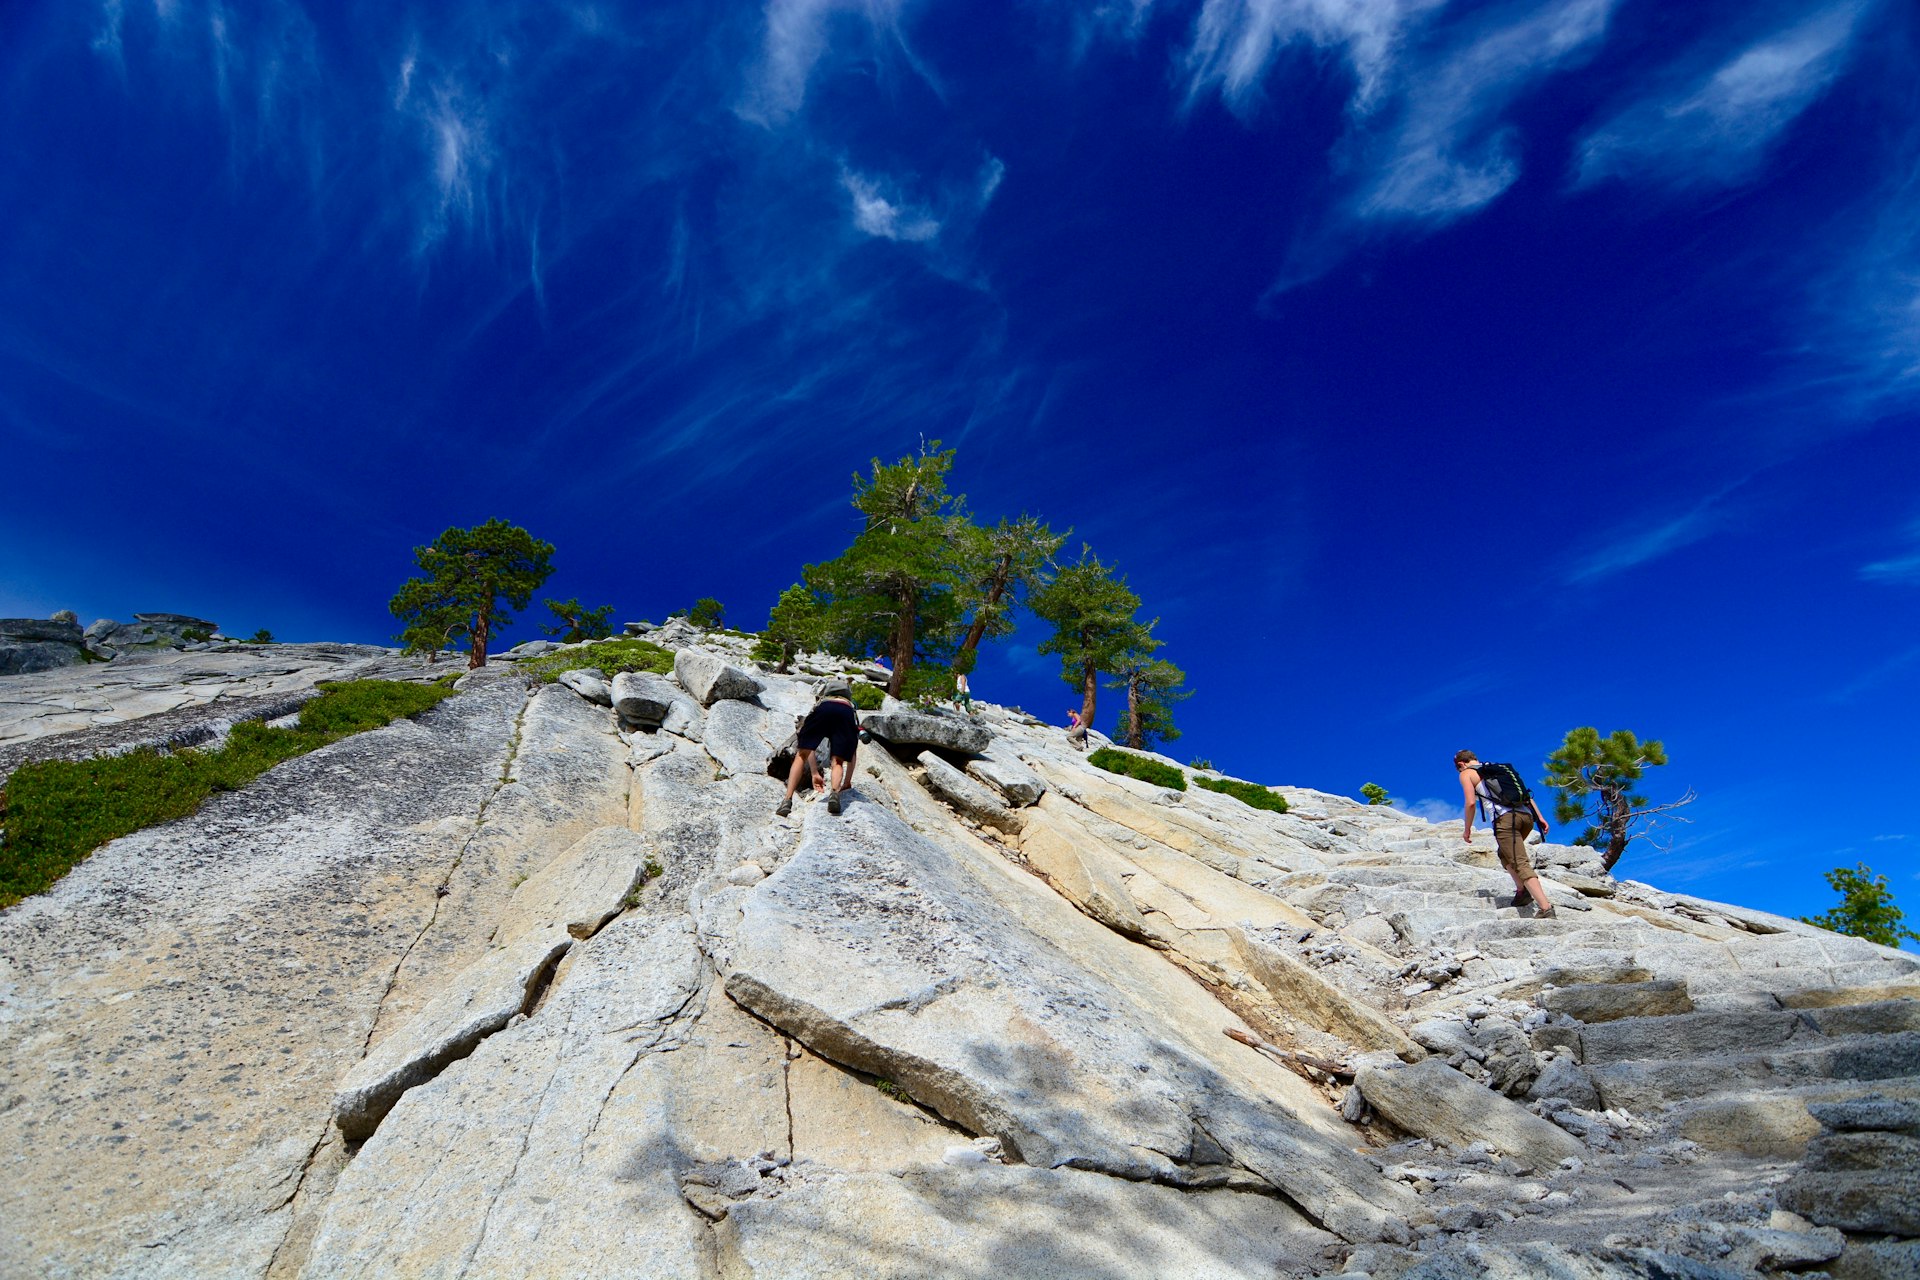 Hikers climbing Yosemite's rocky Half Dome on a sunny day